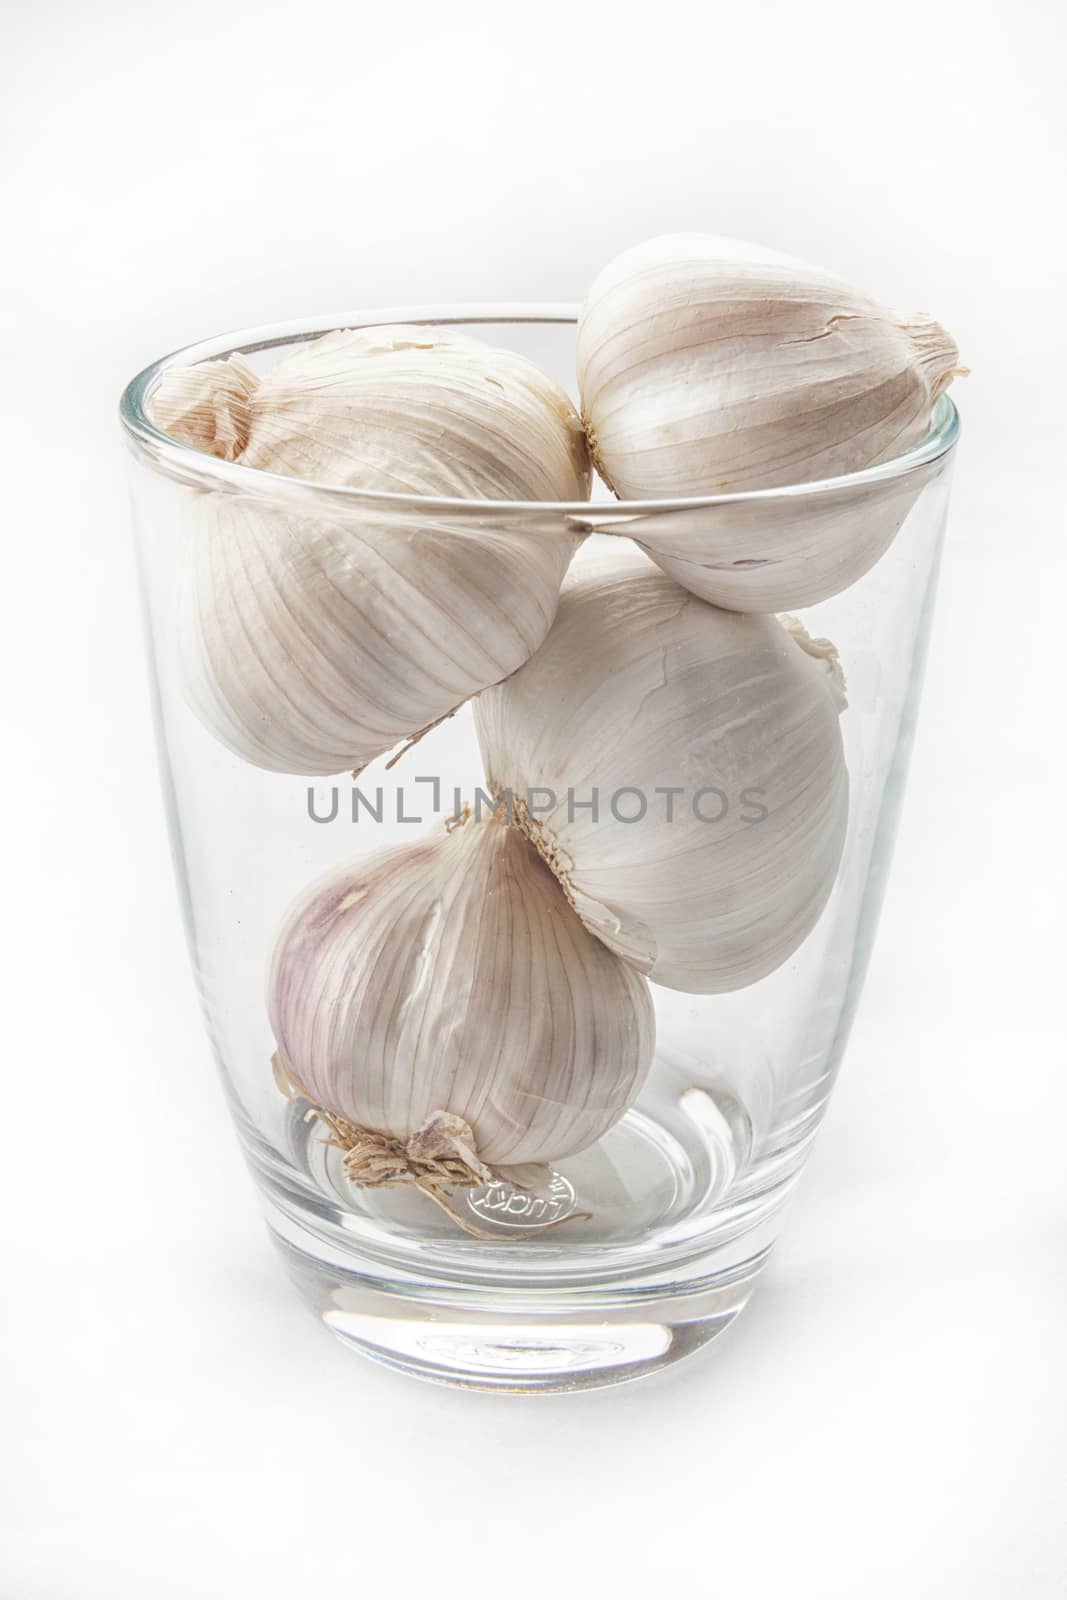 Fresh garlic in glass isolated on white background by nopparats